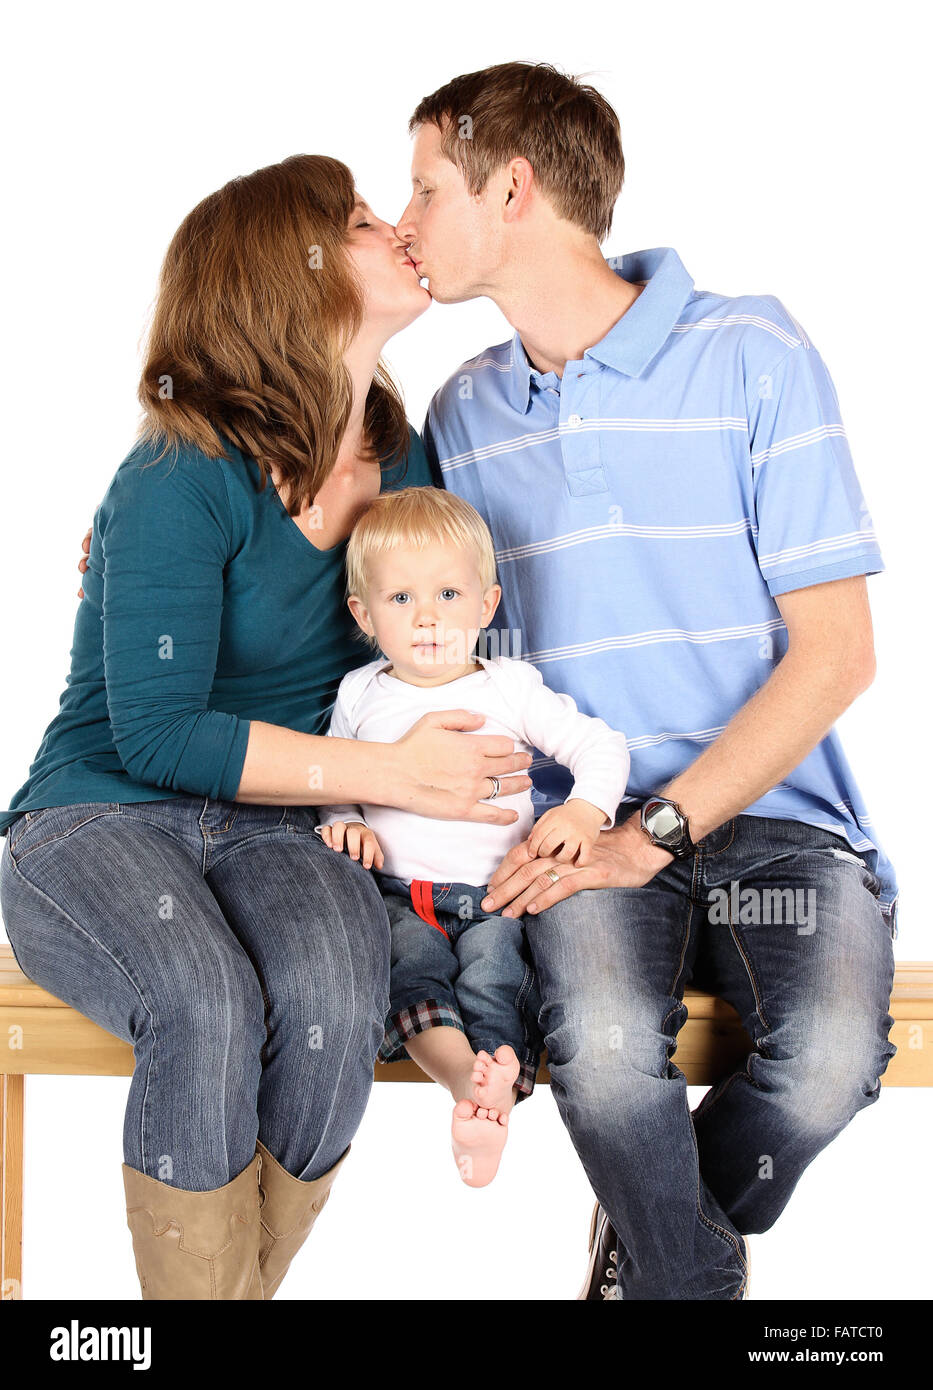 Caucasian family with mom dad and baby boy. They are all wearing denim jeans and sitting on a wooden bench. The parents are kiss Stock Photo